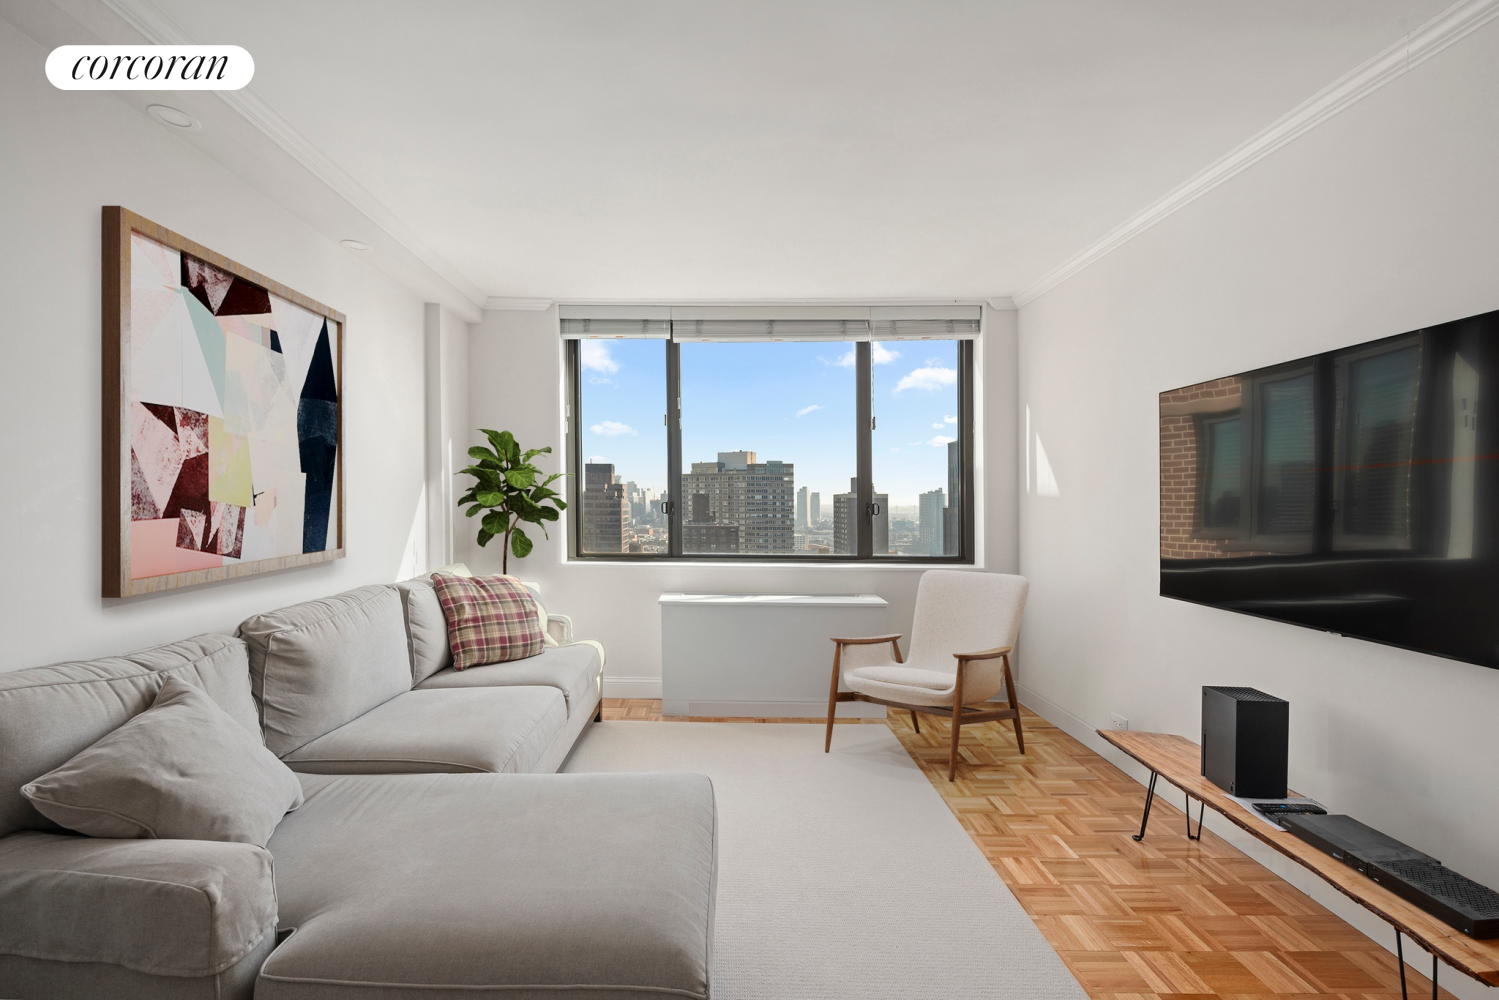 300 East 54th Street 34A, Sutton, Midtown East, NYC - 1 Bedrooms  
1 Bathrooms  
3 Rooms - 